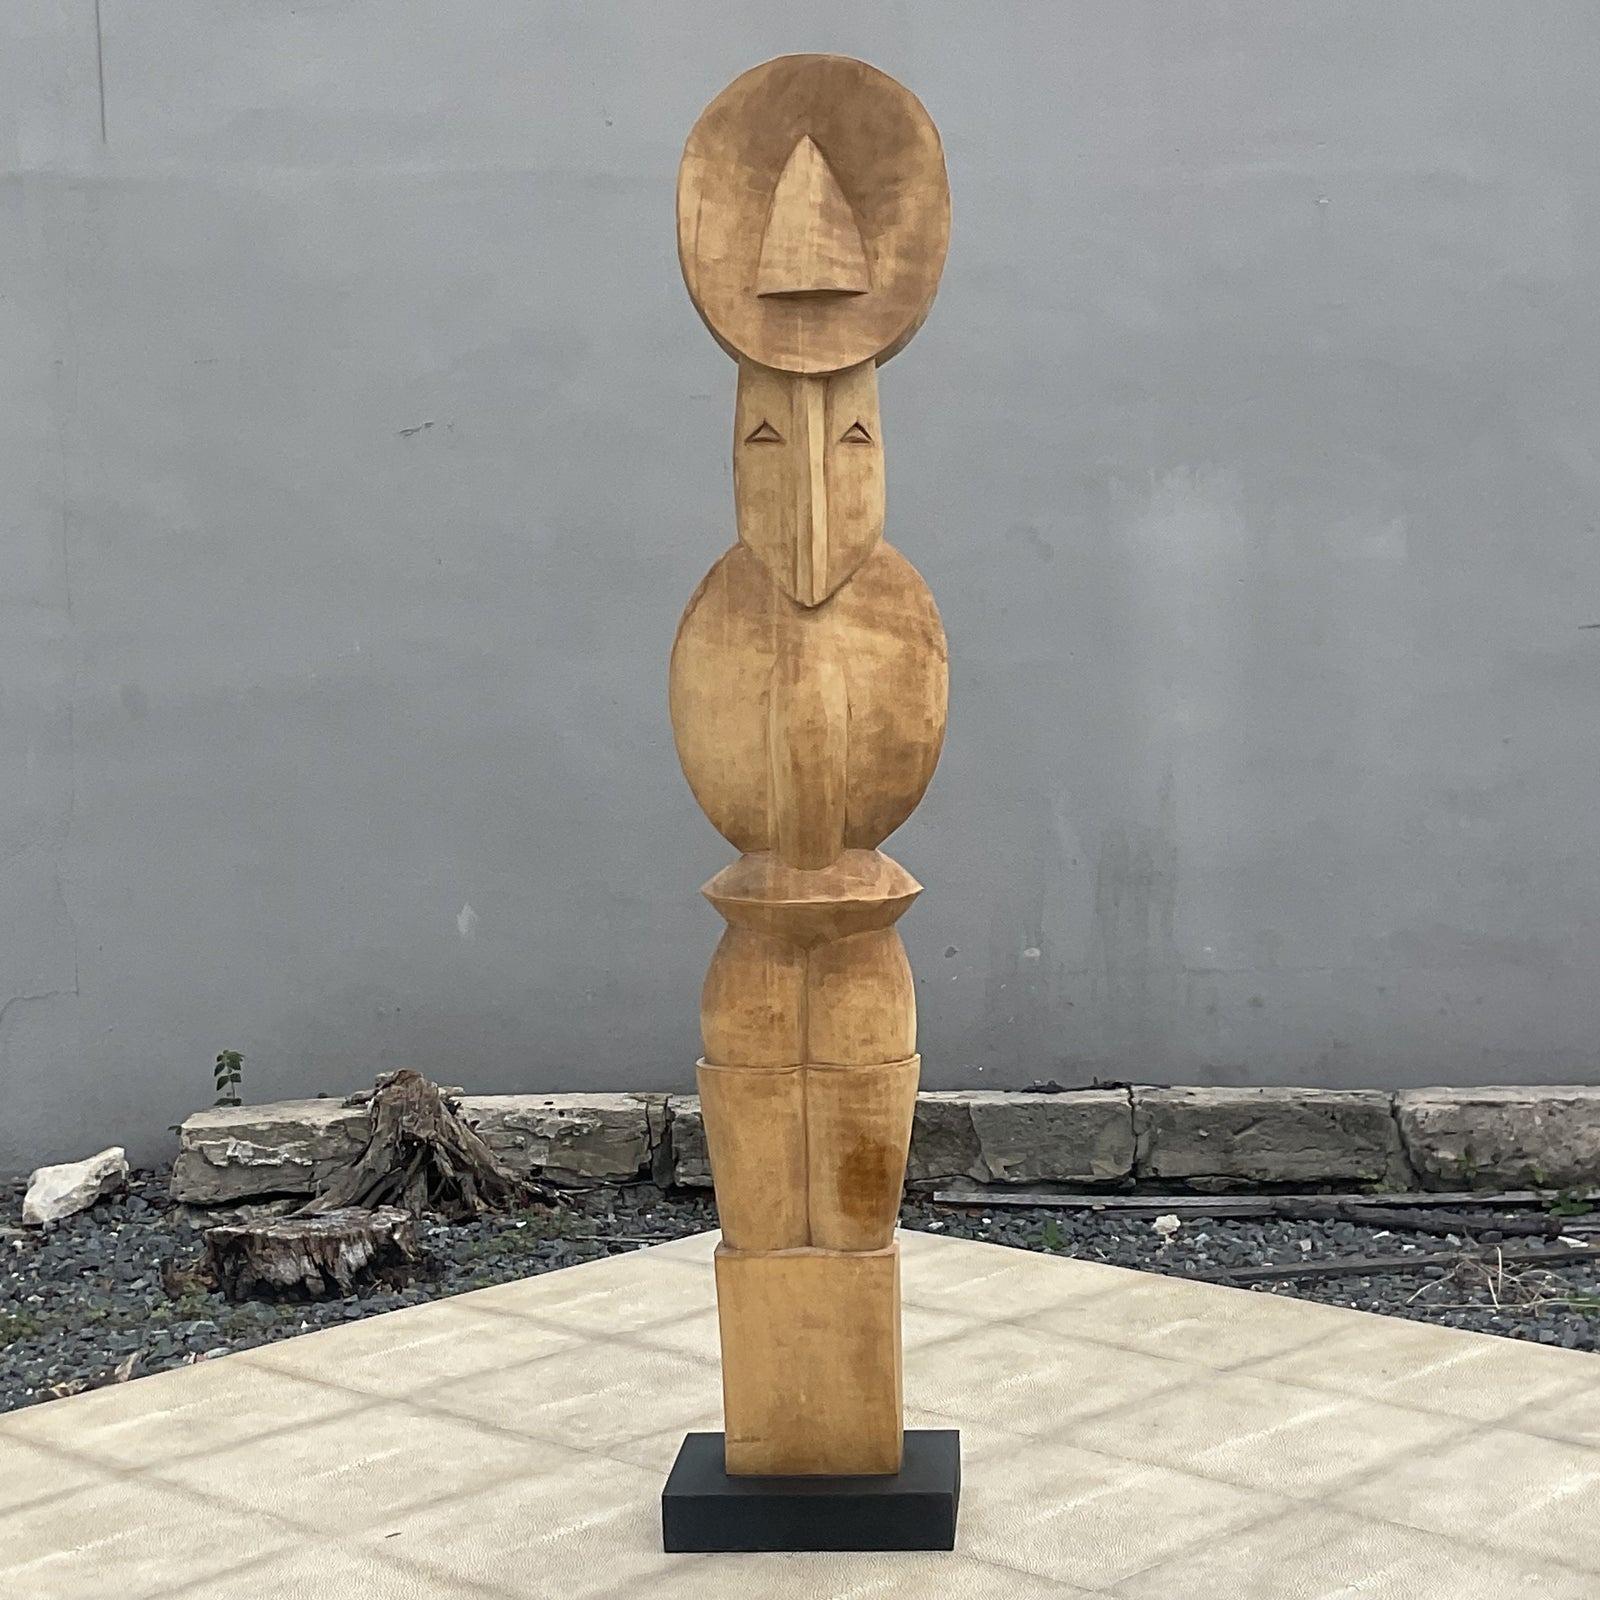 A fabulous vintage Boho totem sculpture. A chic Abstract composition rendered in wood. Acquired from a Palm Beach estate.